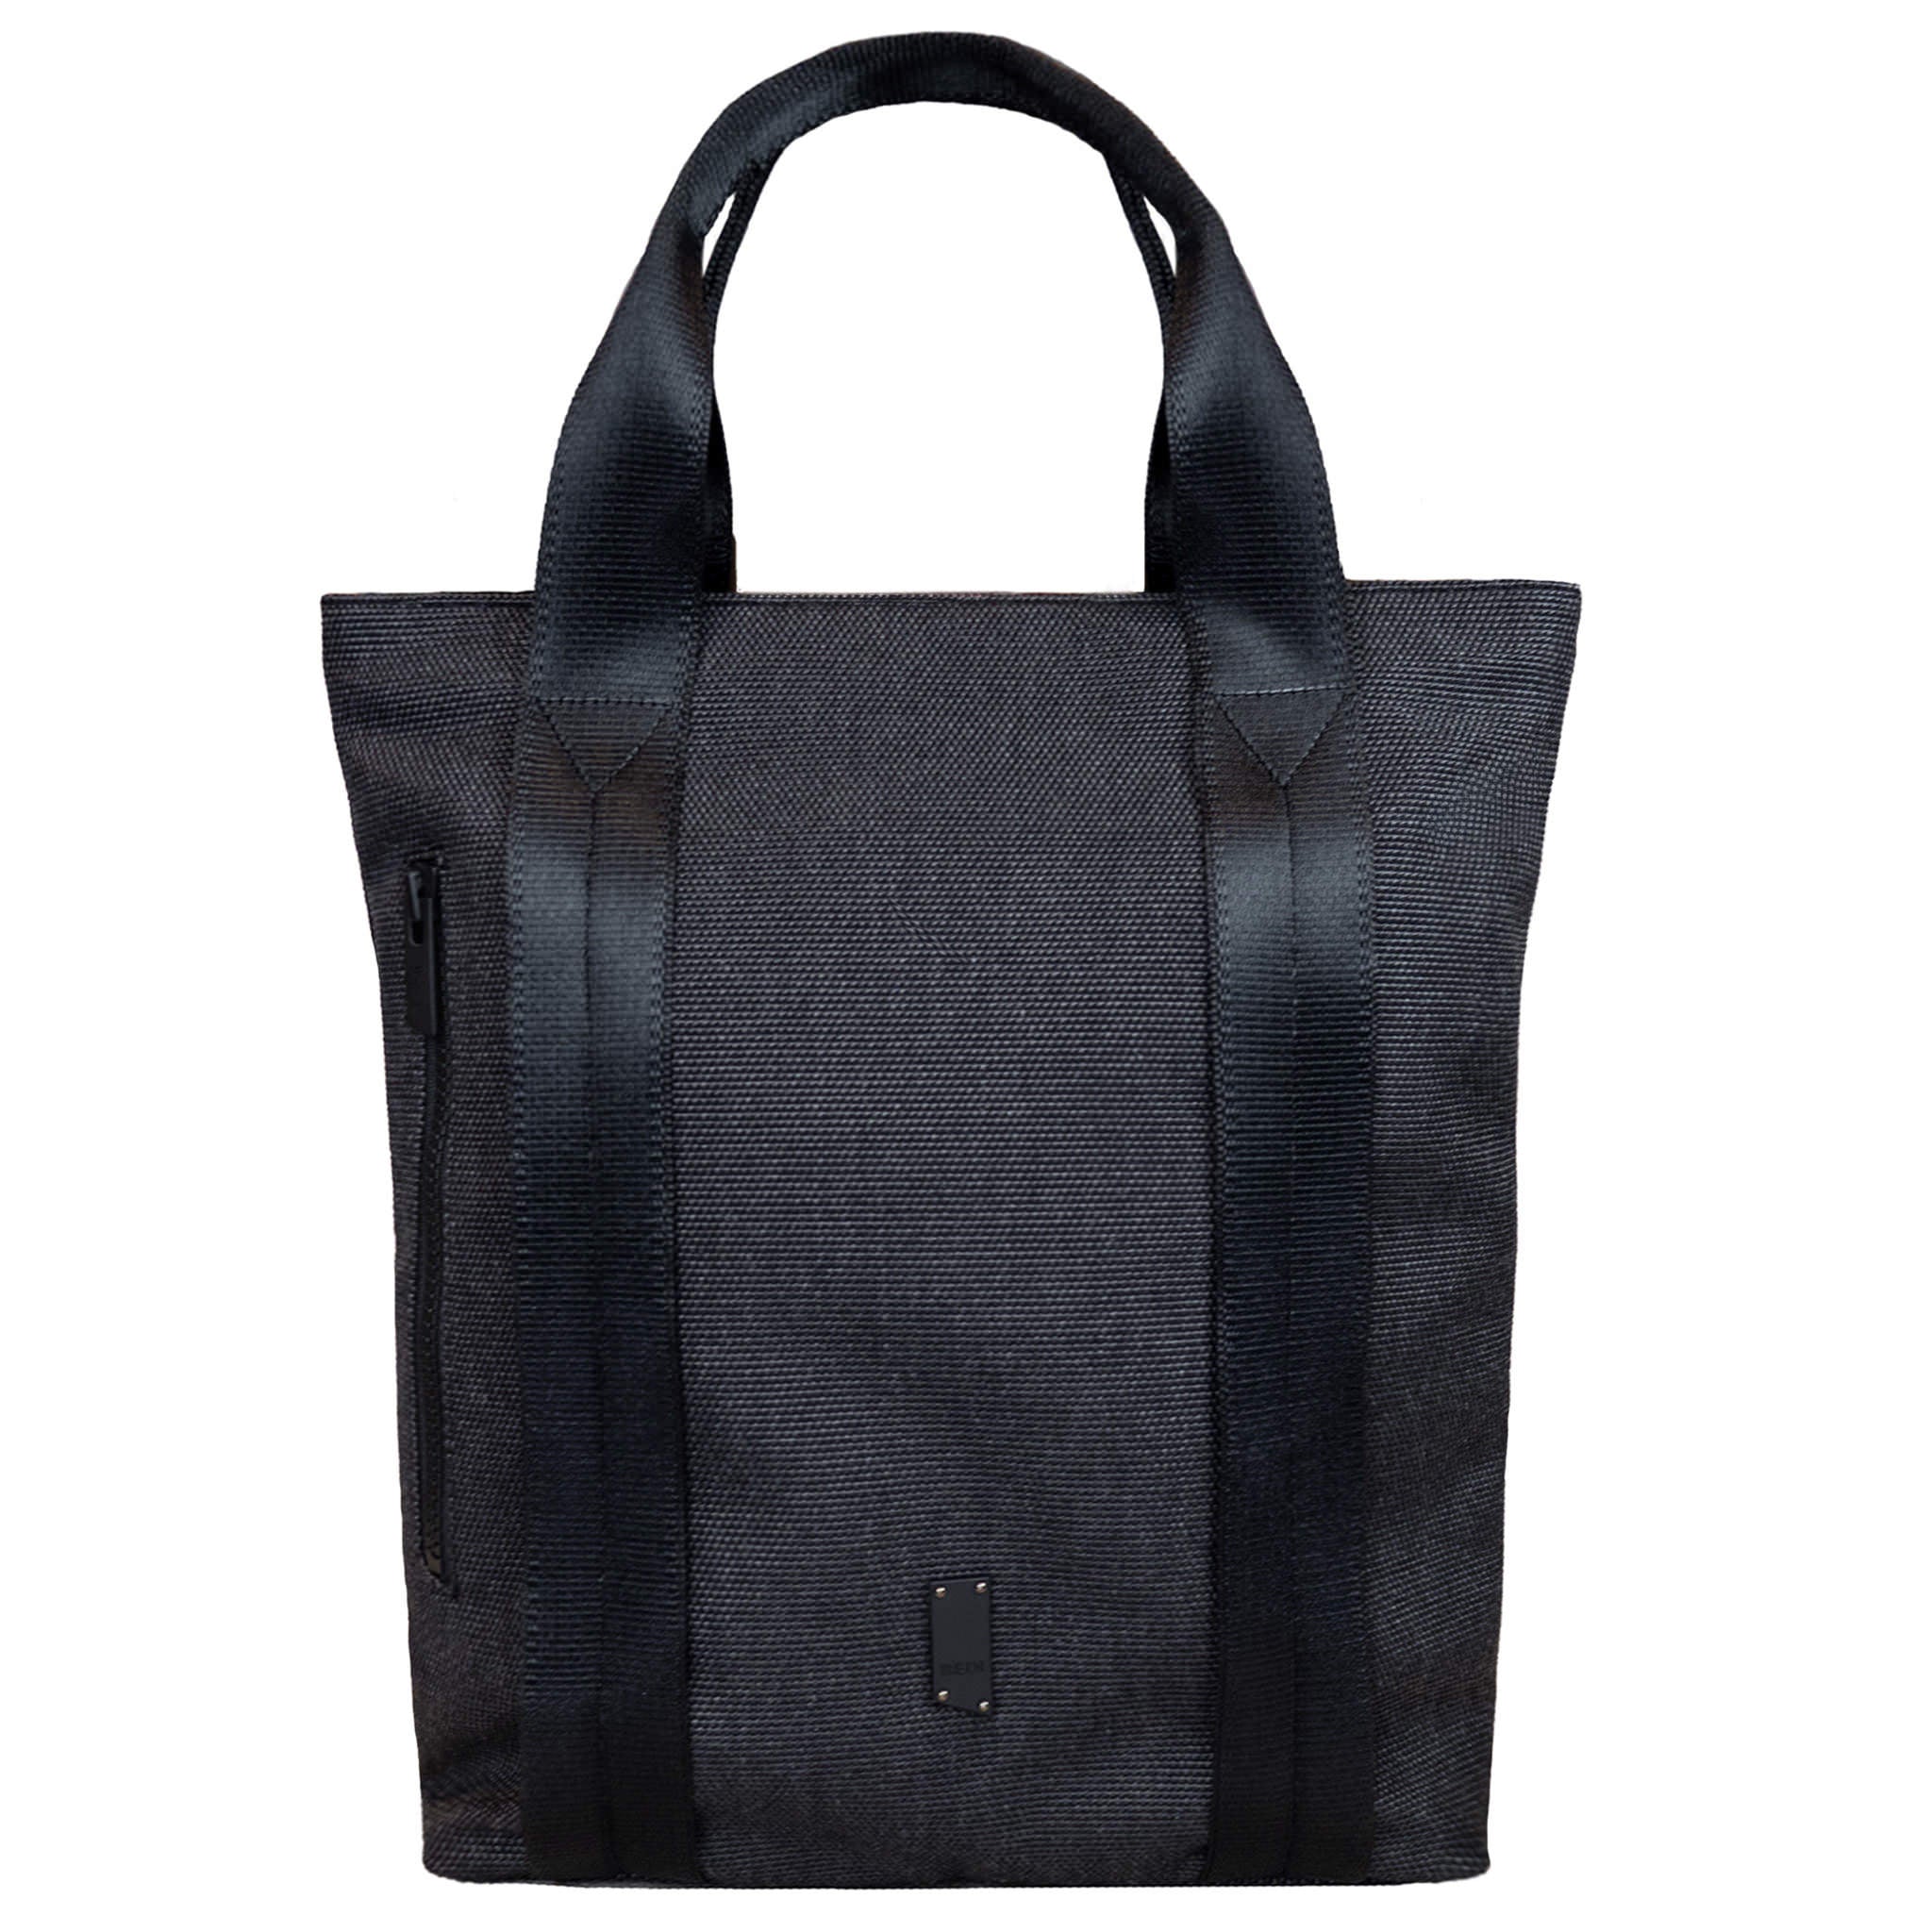 Tote bag made with grey twill material. There is a vertical black zipper on the left side, and the black seatbelt straps continue all the way down the front of the bag